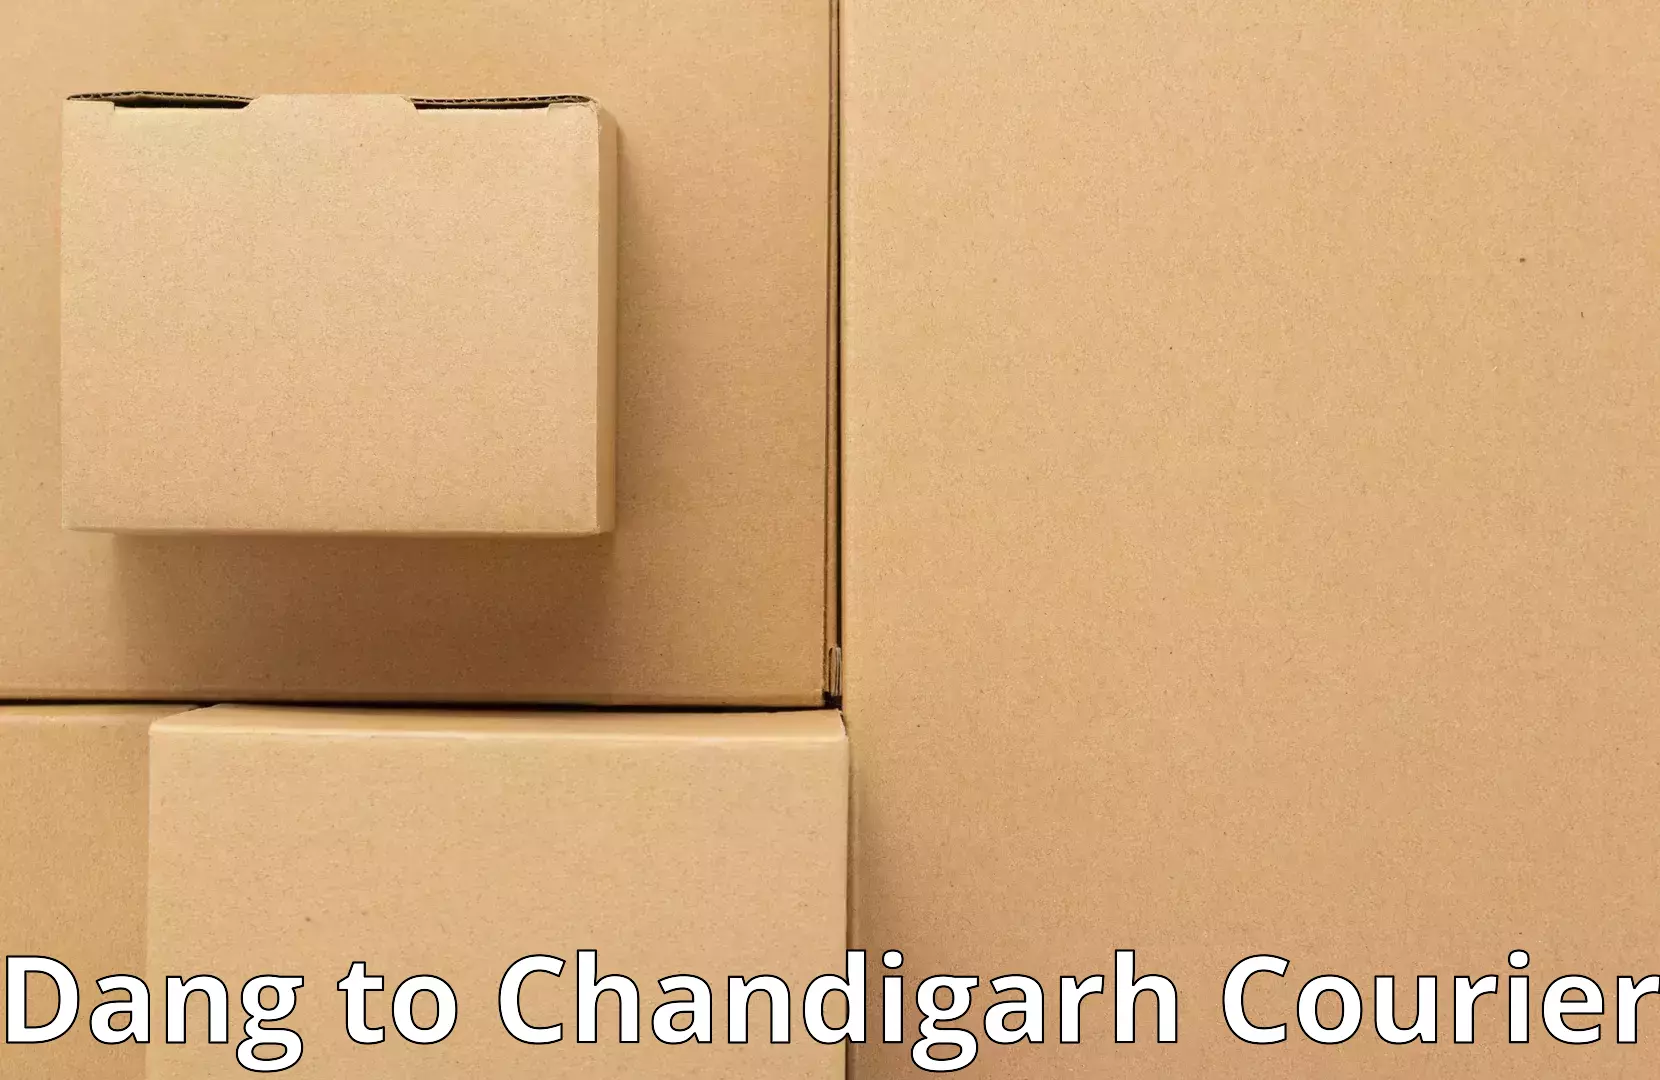 Furniture transport company Dang to Chandigarh